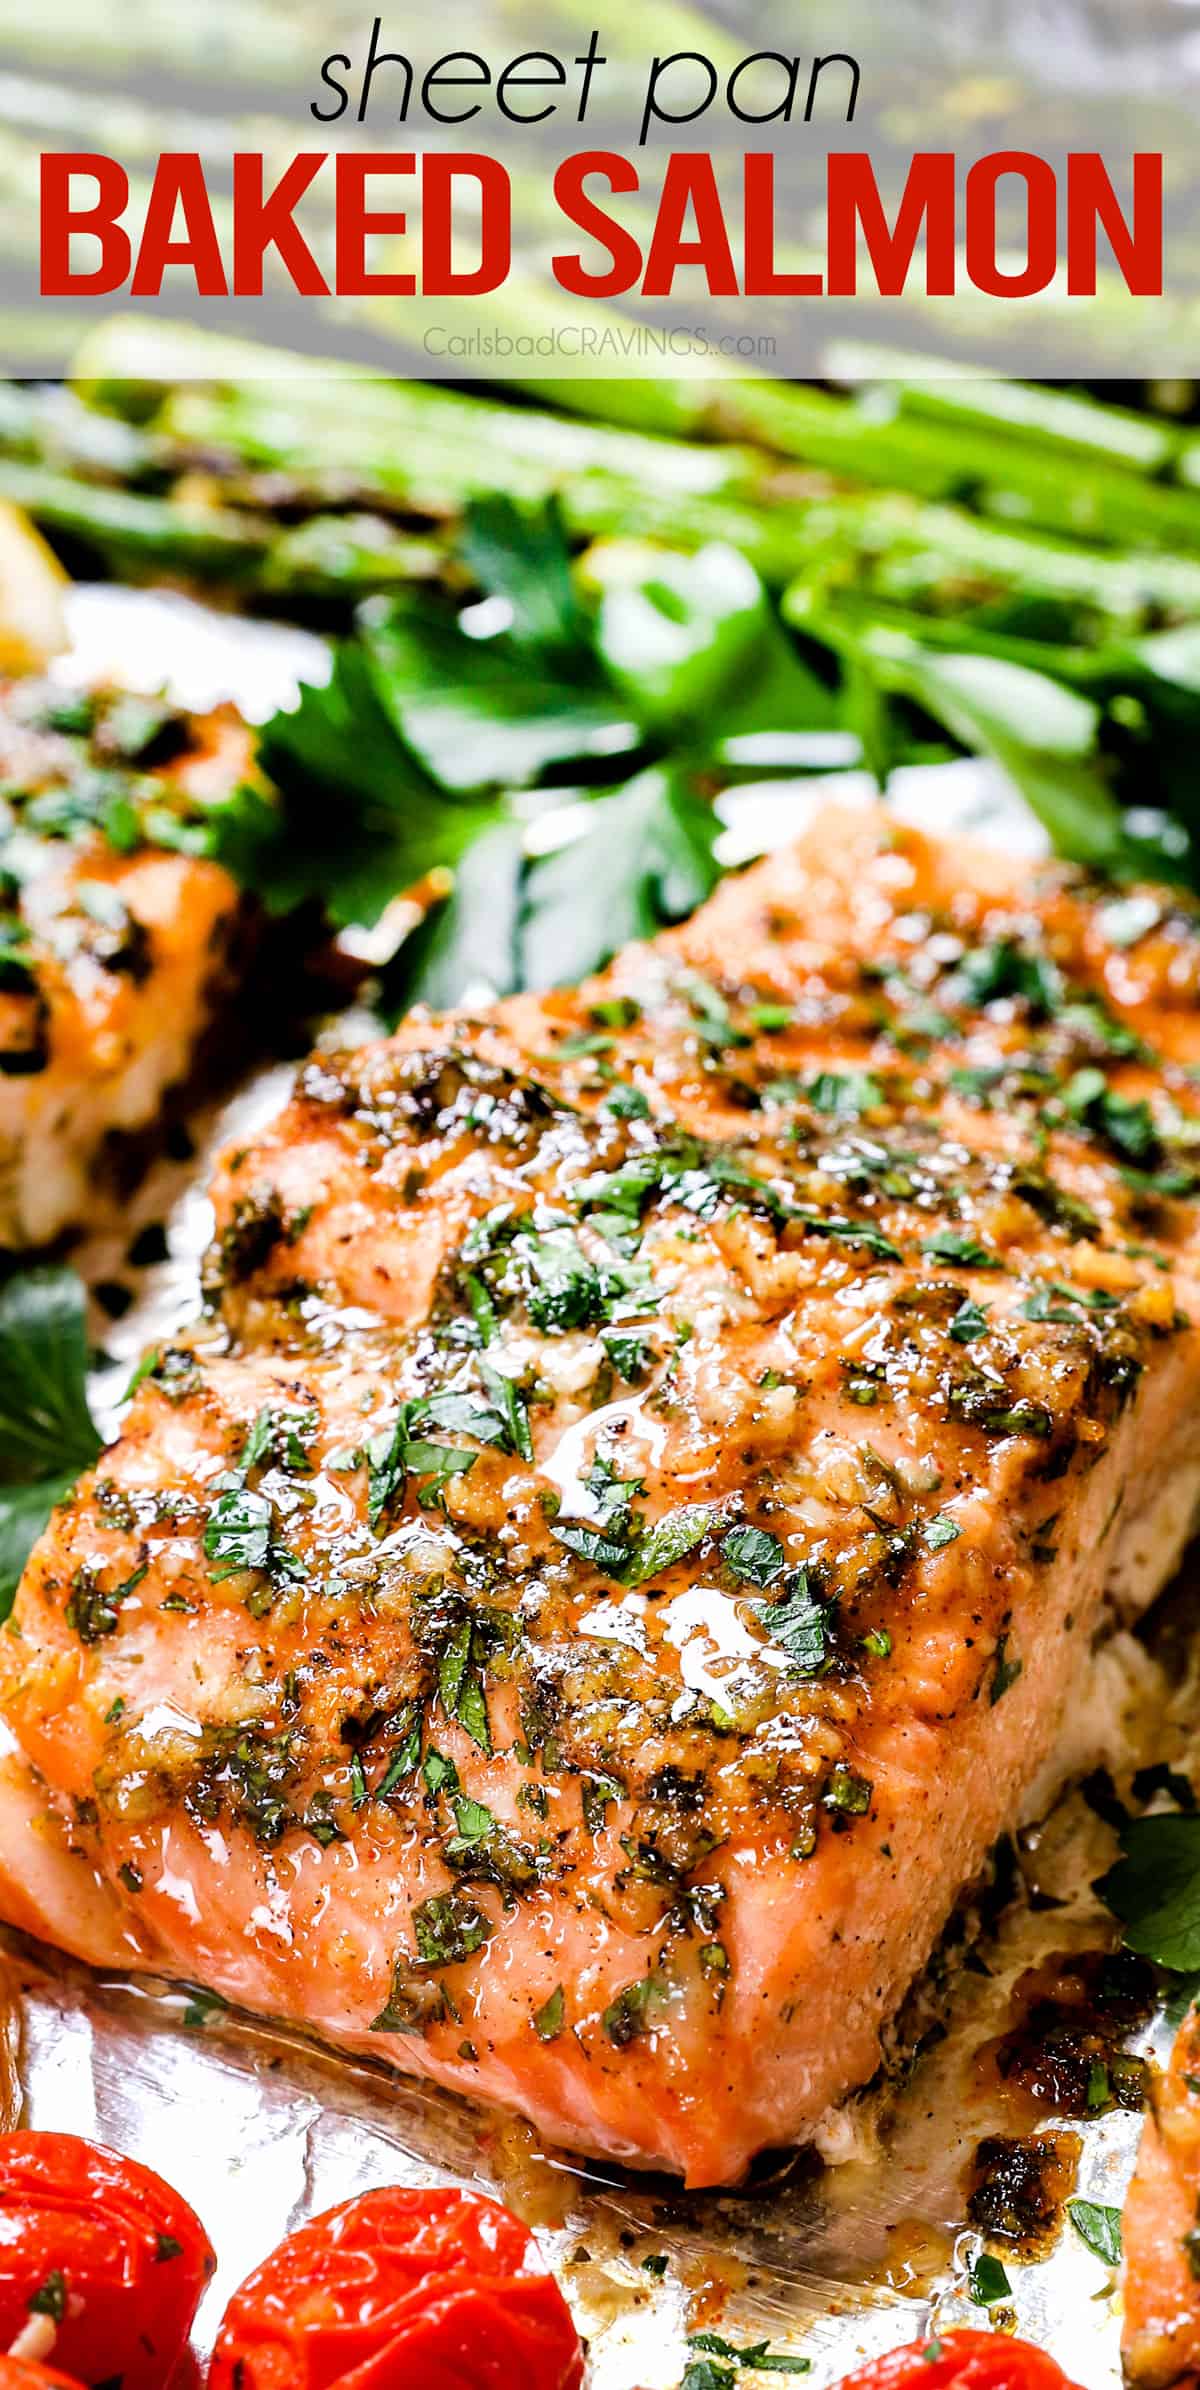 up close of baked salmon recipe showing how juicy it is